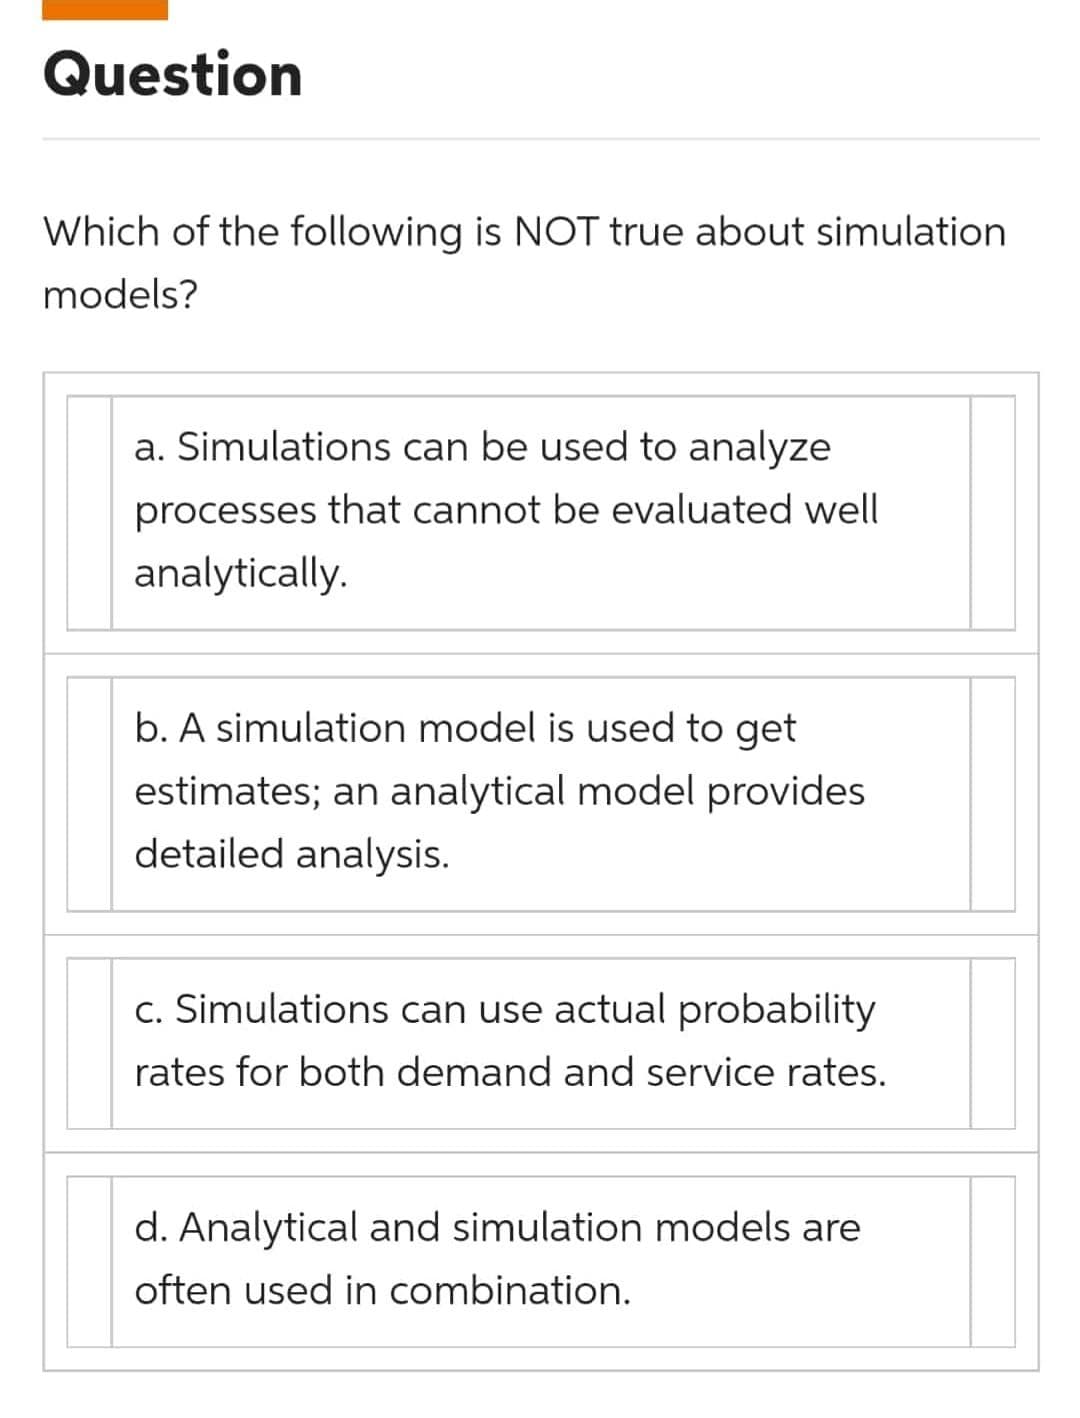 Question
Which of the following is NOT true about simulation
models?
a. Simulations can be used to analyze
processes that cannot be evaluated well
analytically.
b. A simulation model is used to get
estimates; an analytical model provides
detailed analysis.
c. Simulations can use actual probability
rates for both demand and service rates.
d. Analytical and simulation models are
often used in combination.